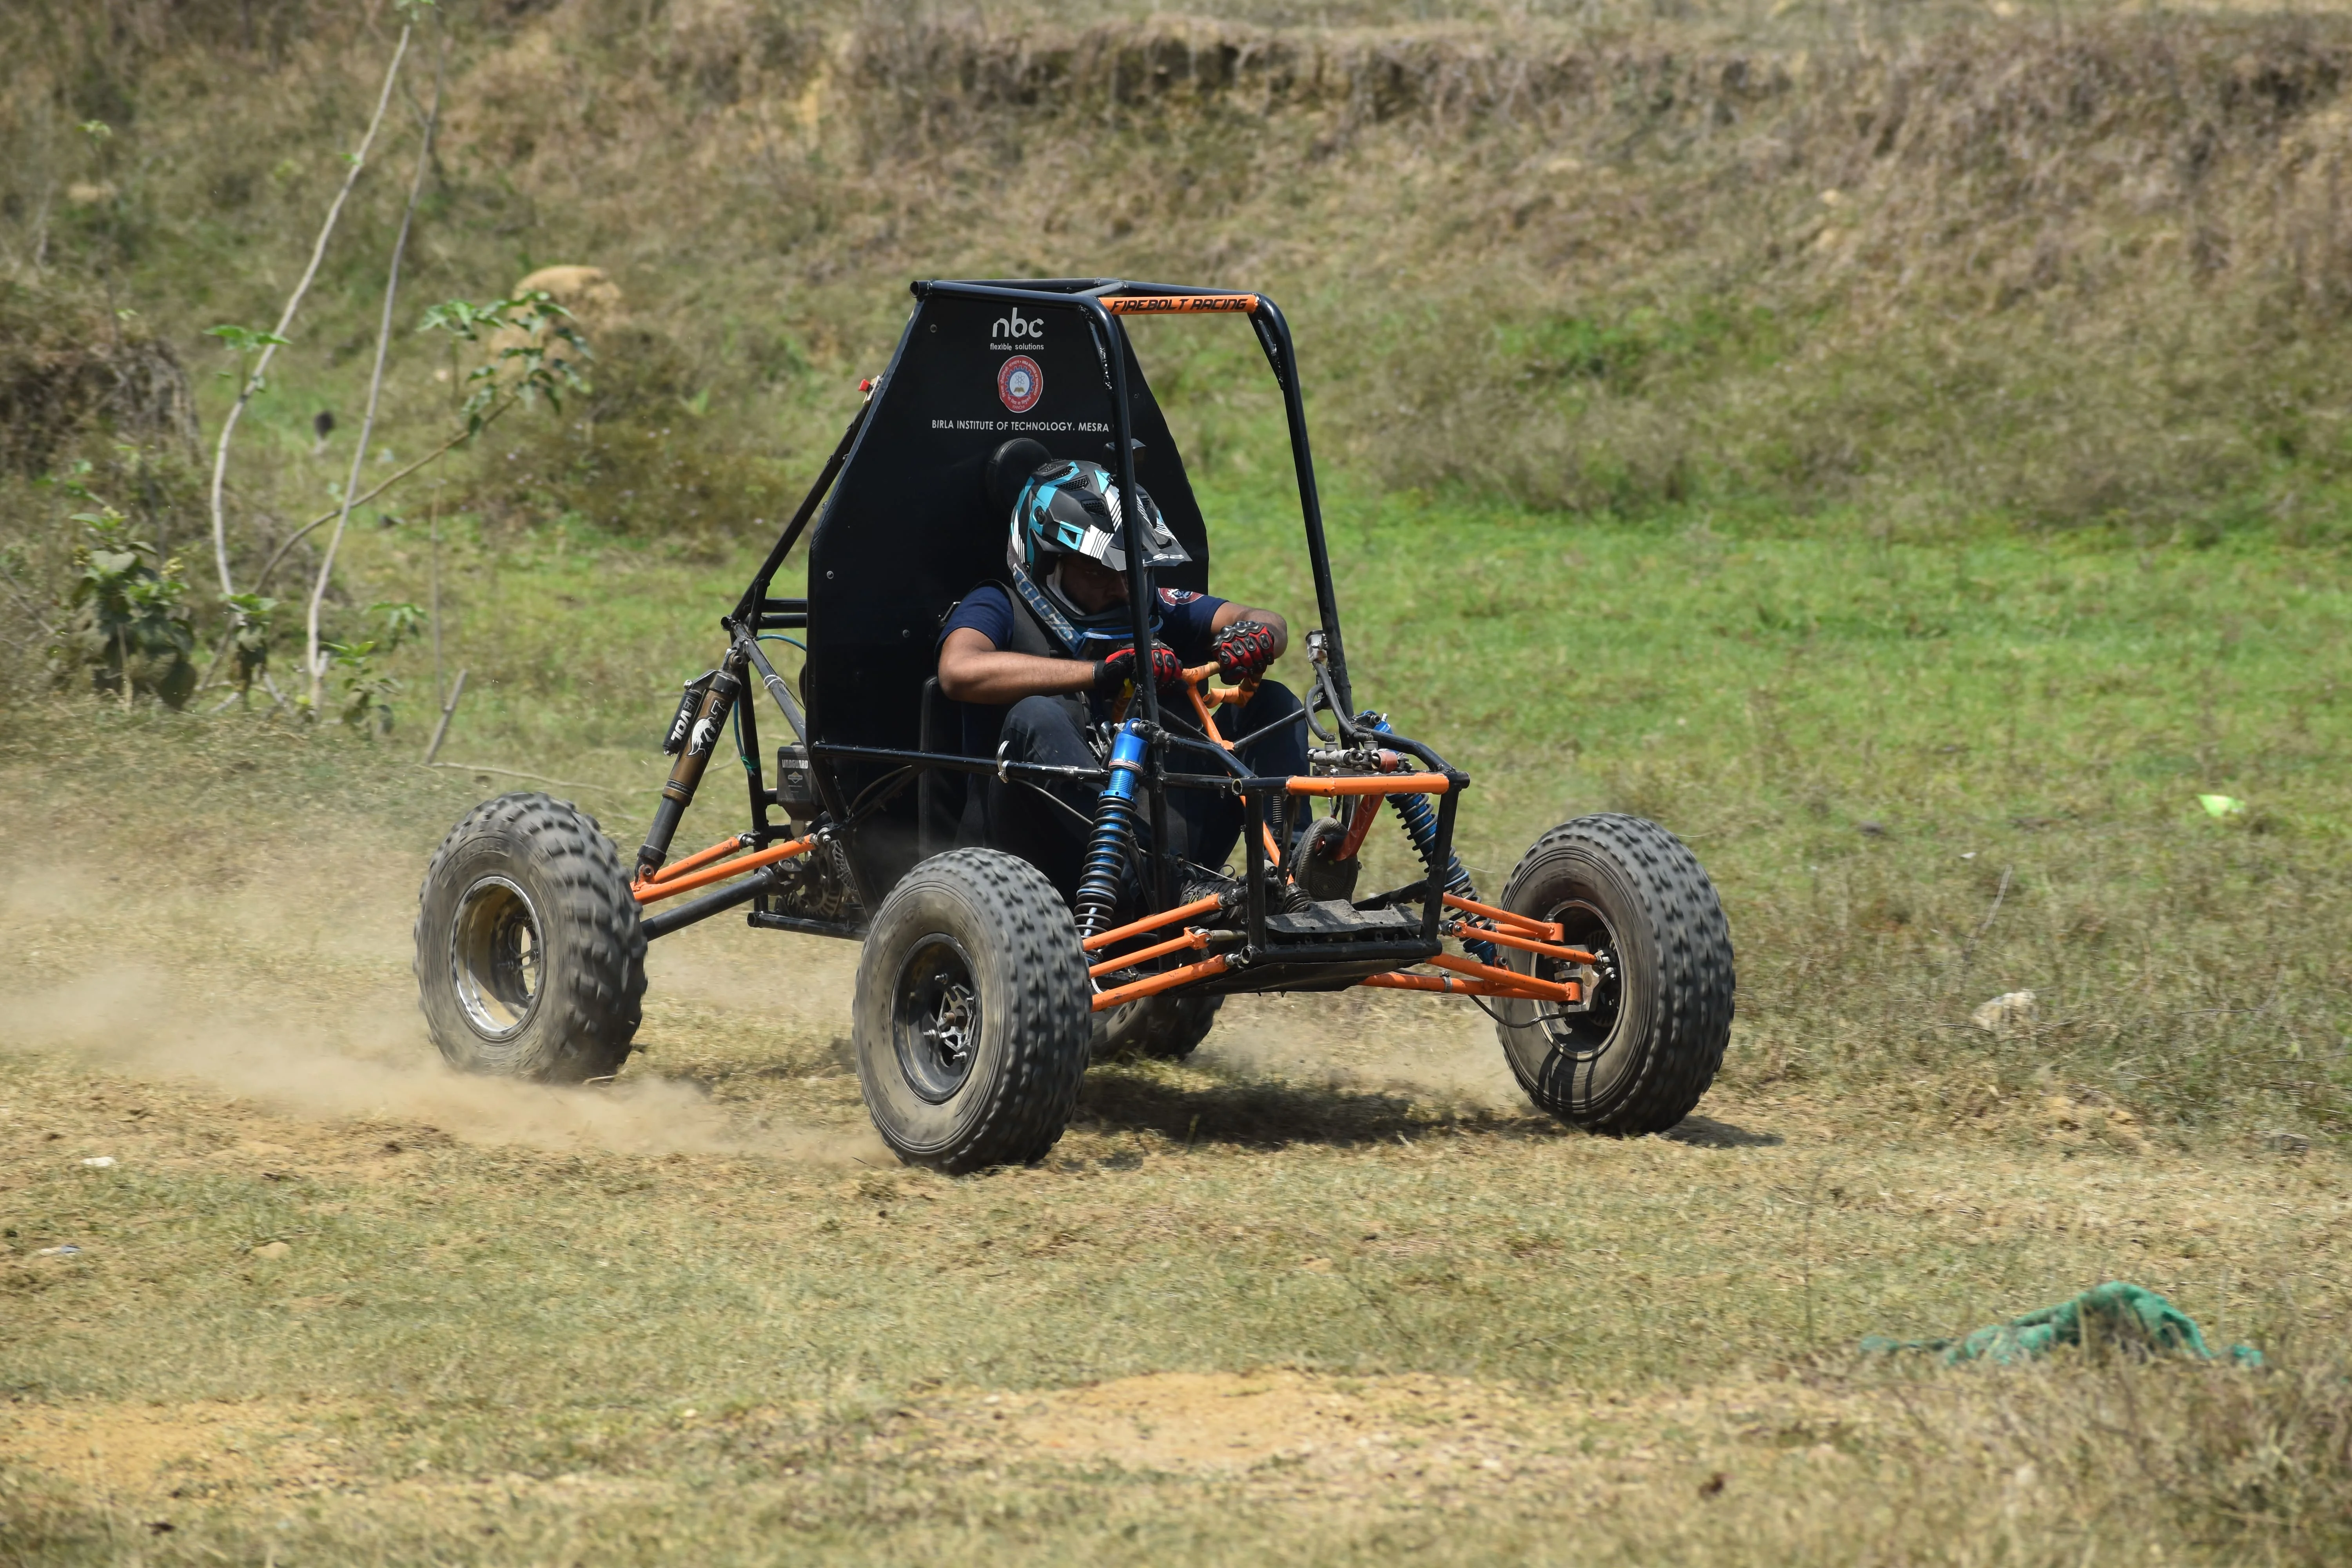 Off-roading by the ATV made by Team Firebolt Racing